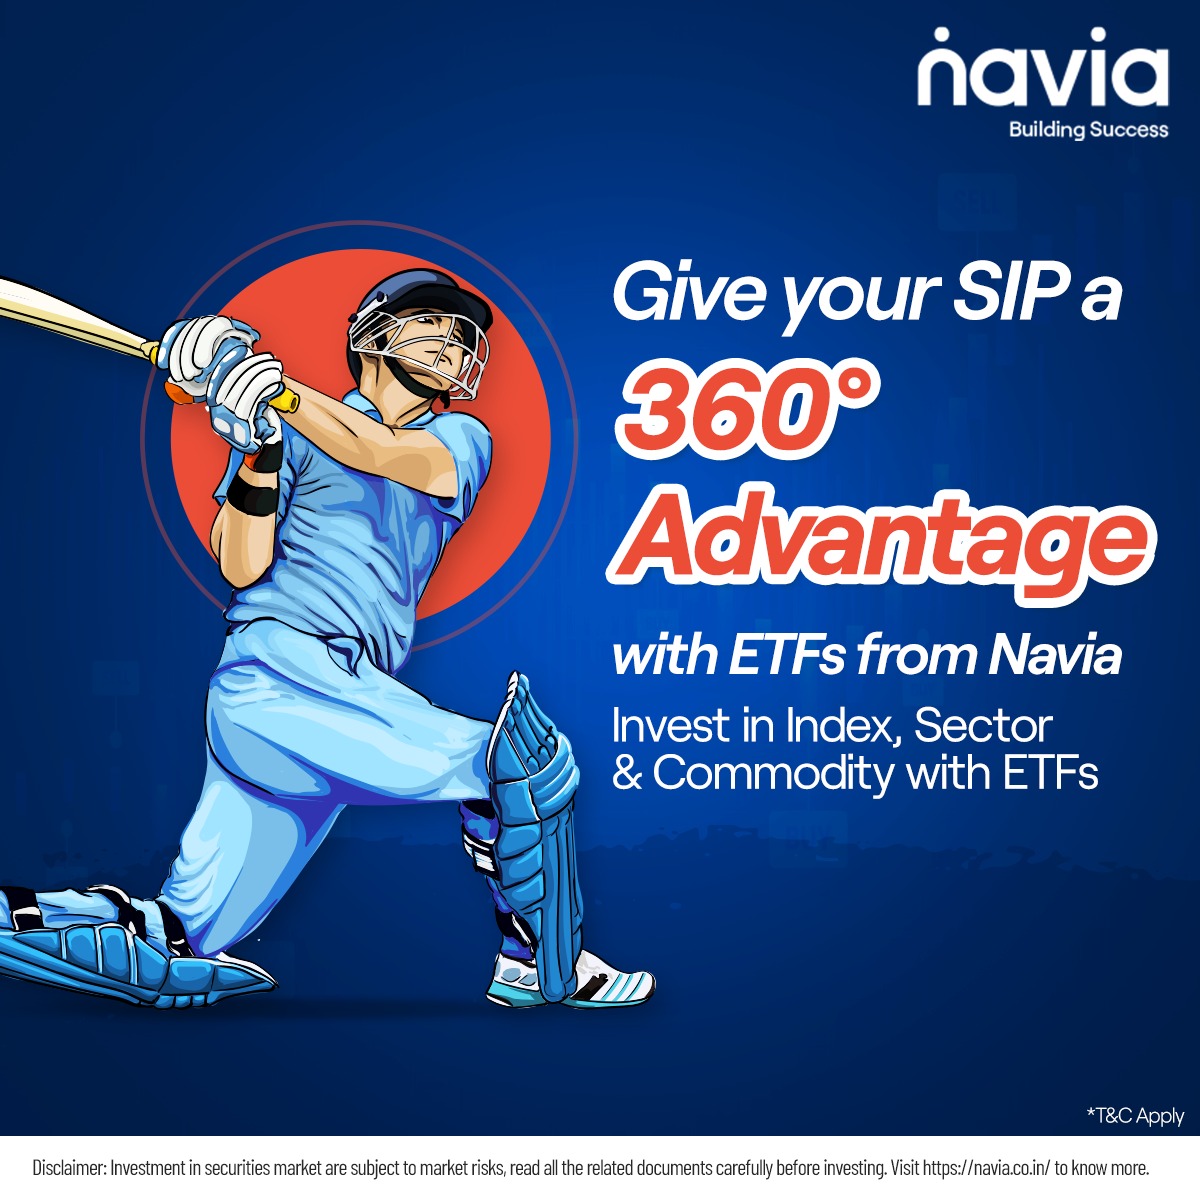 Ready to supercharge your portfolio? Explore Index, Sector & Commodity ETFs with Navia and experience the 360° advantage. Get started today!

#Navia #TrustedTradingPartner #TradeSmart #FinancialFreedom #InvestingJourney #StockMarket #Trading #WealthCreation #GrowYourSIP…